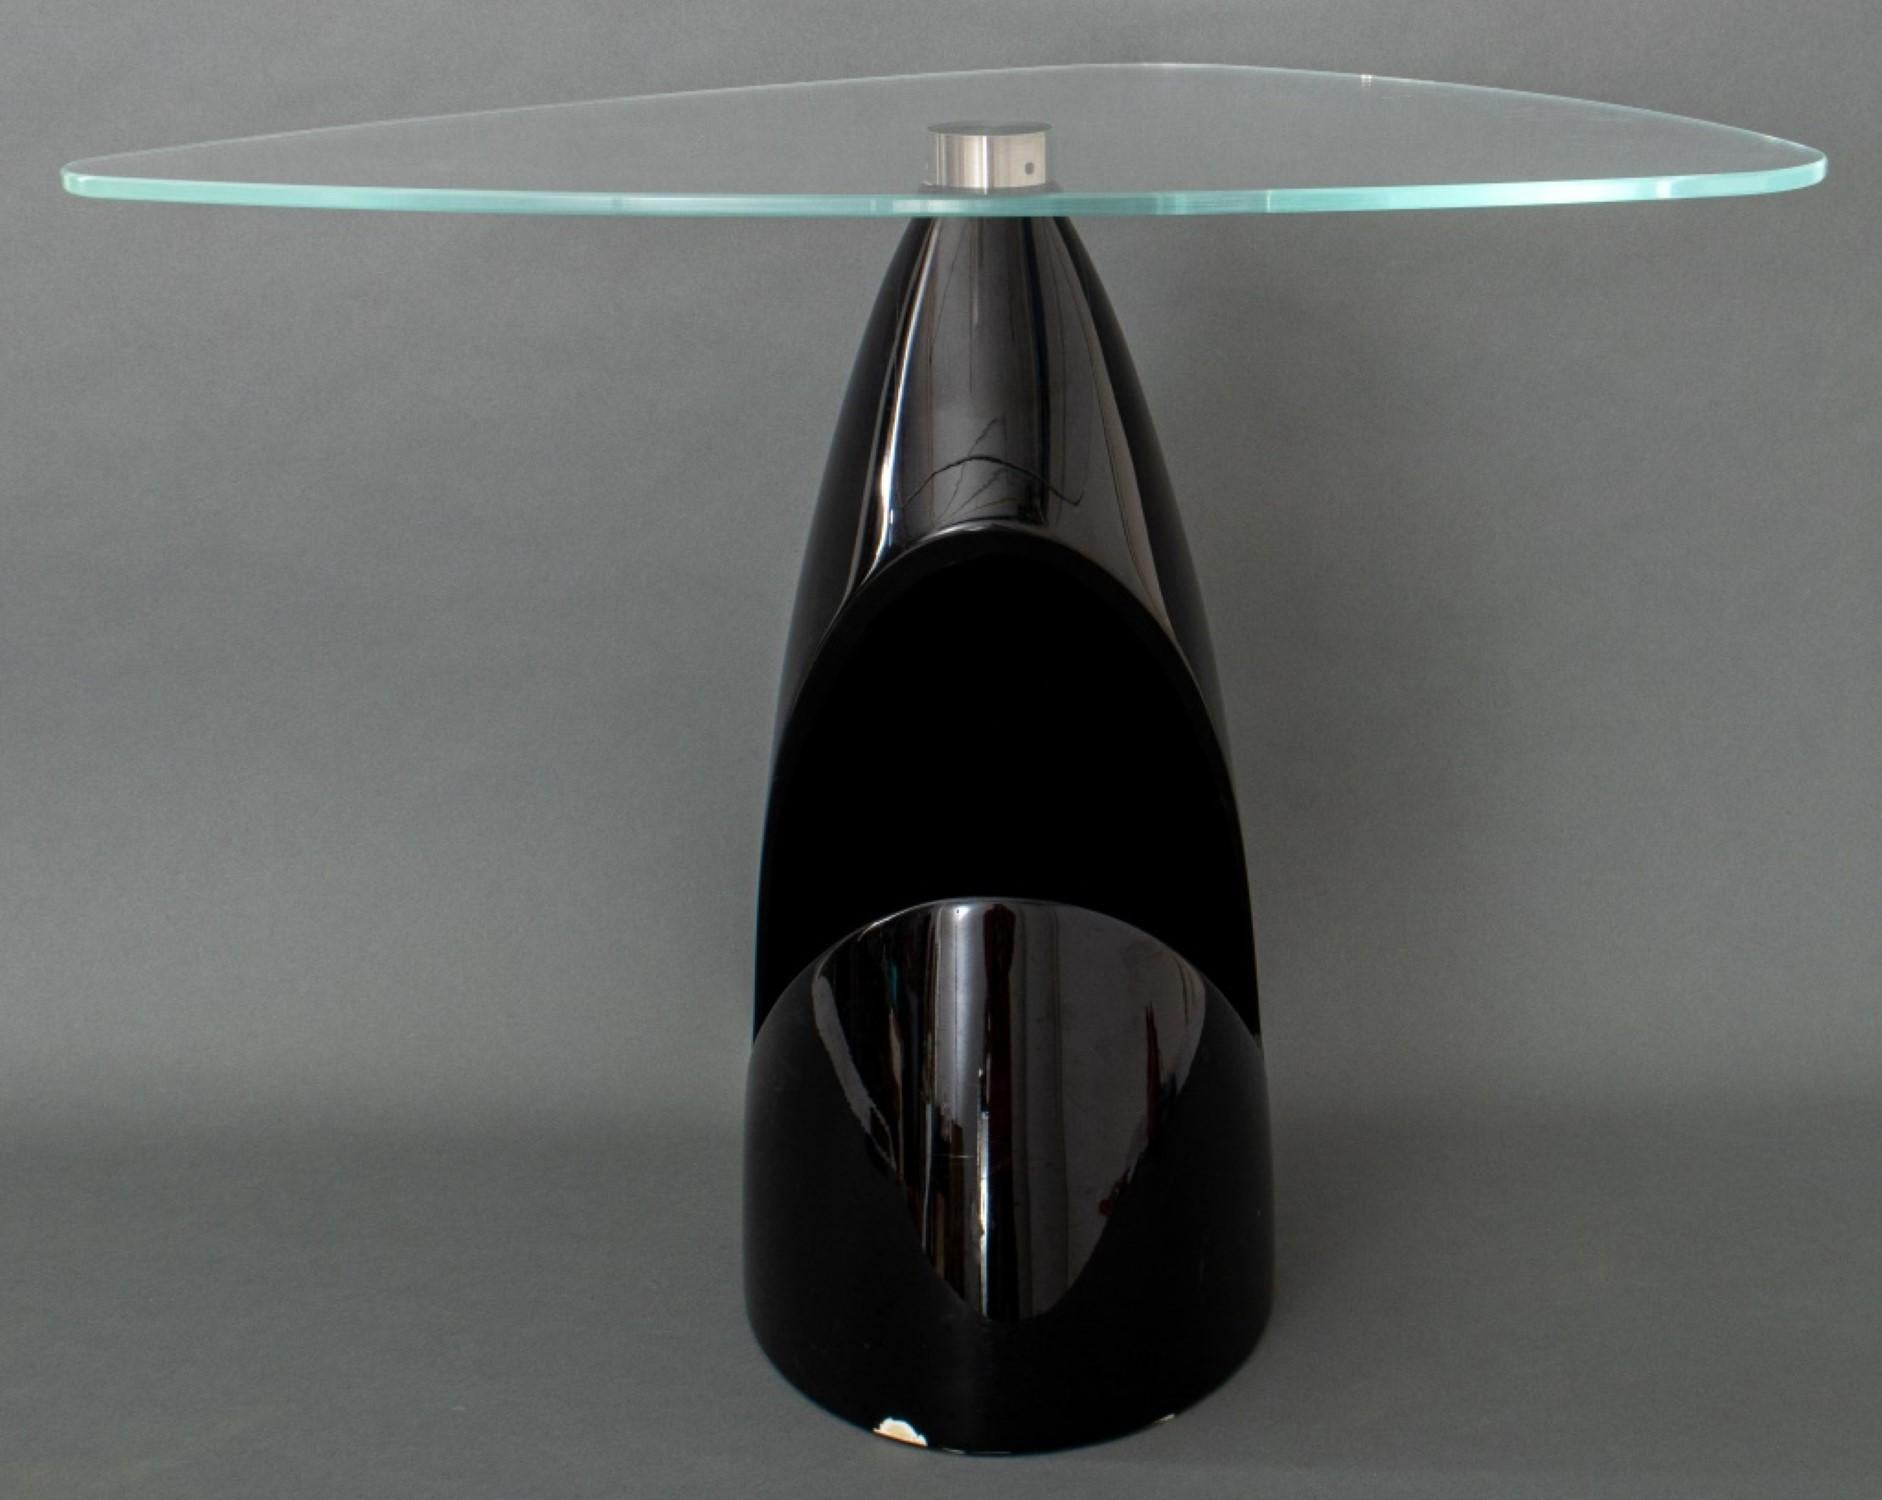 Black Abstract Sculptural Side Table

Materials: Fiberglass and metal base with glass top
Style: Abstract sculptural
Unsigned: No artist's mark identified
Dimensions: 18.5